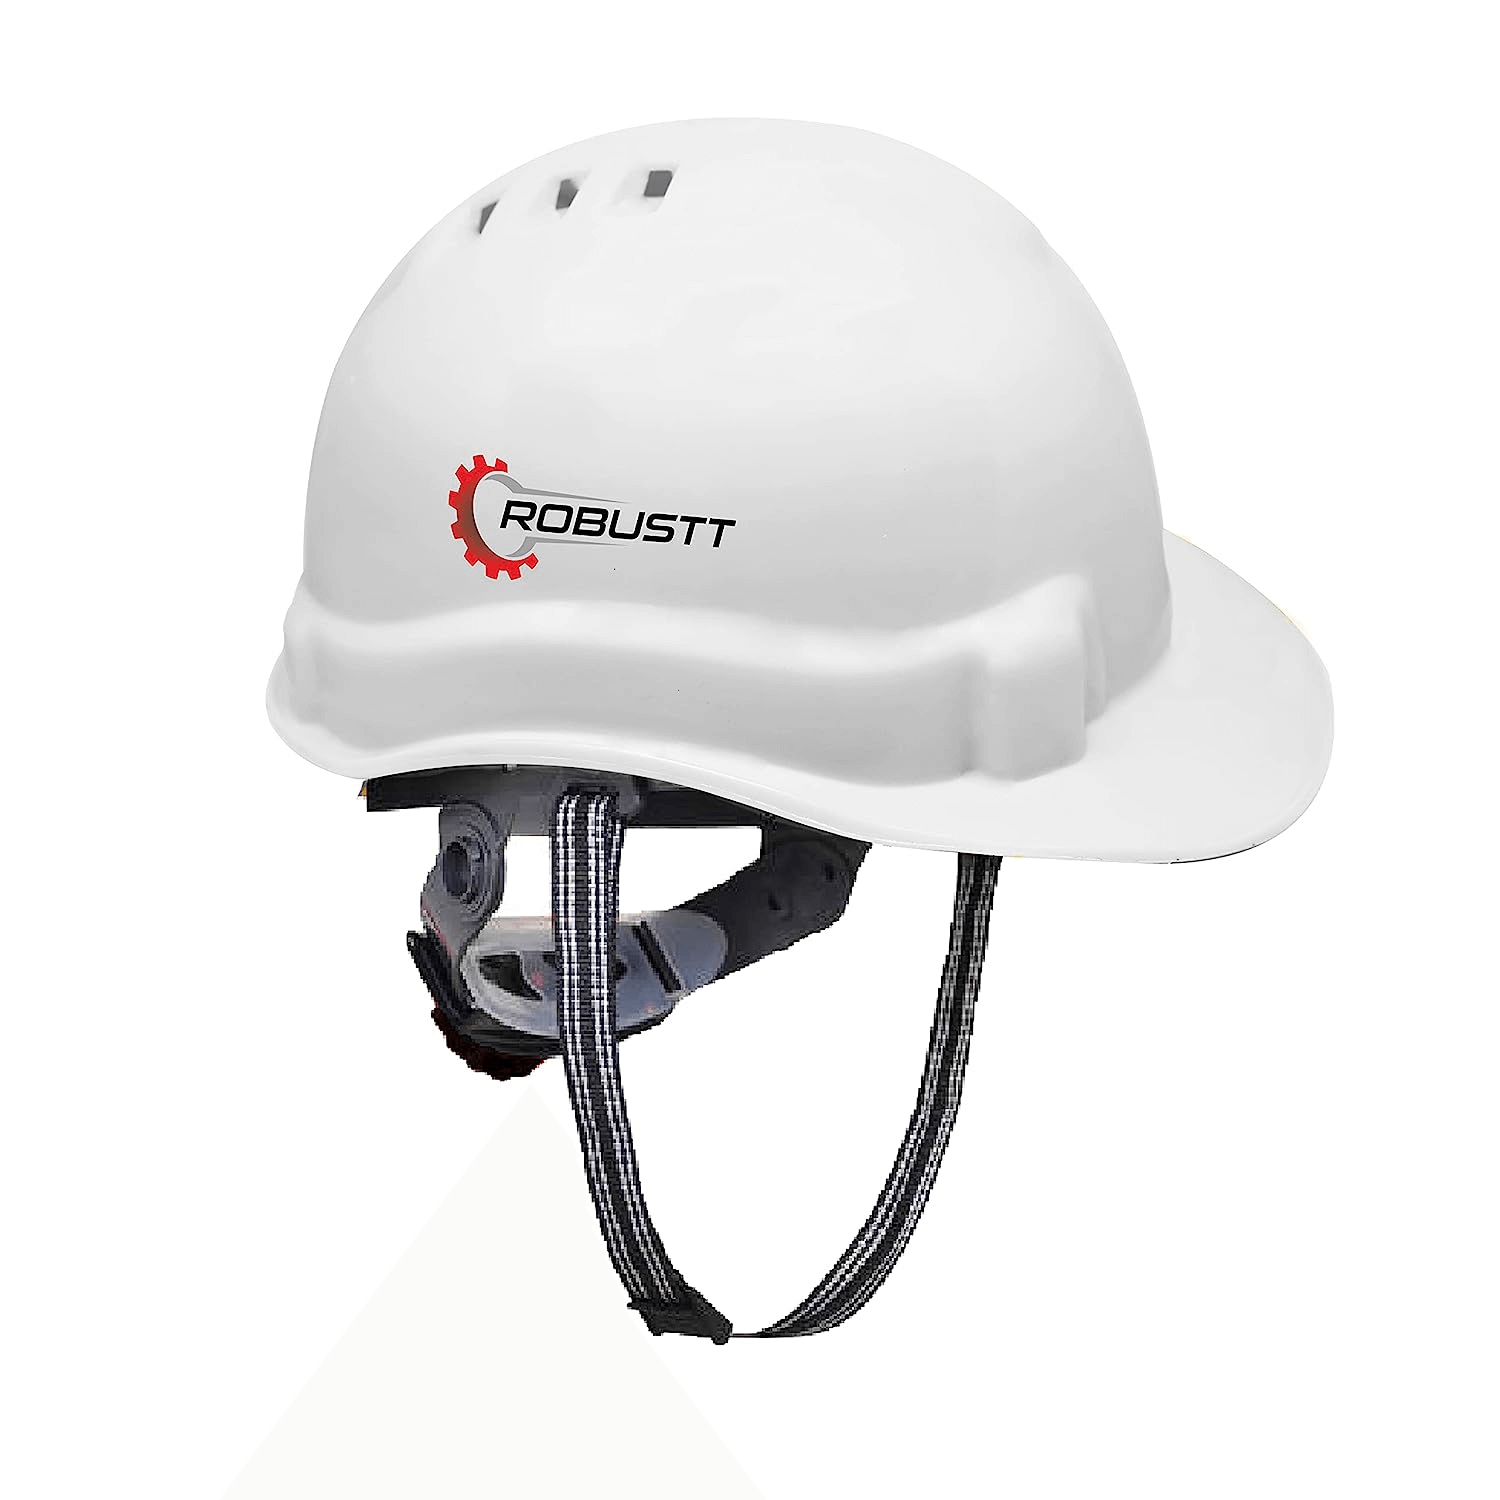 robustt-x-shree-jee-safety-helmet-executive-ratchet-type-adjustment-protection-for-outdoor-work-head-safety-hat-with-sweat-band-white-pack-of-1